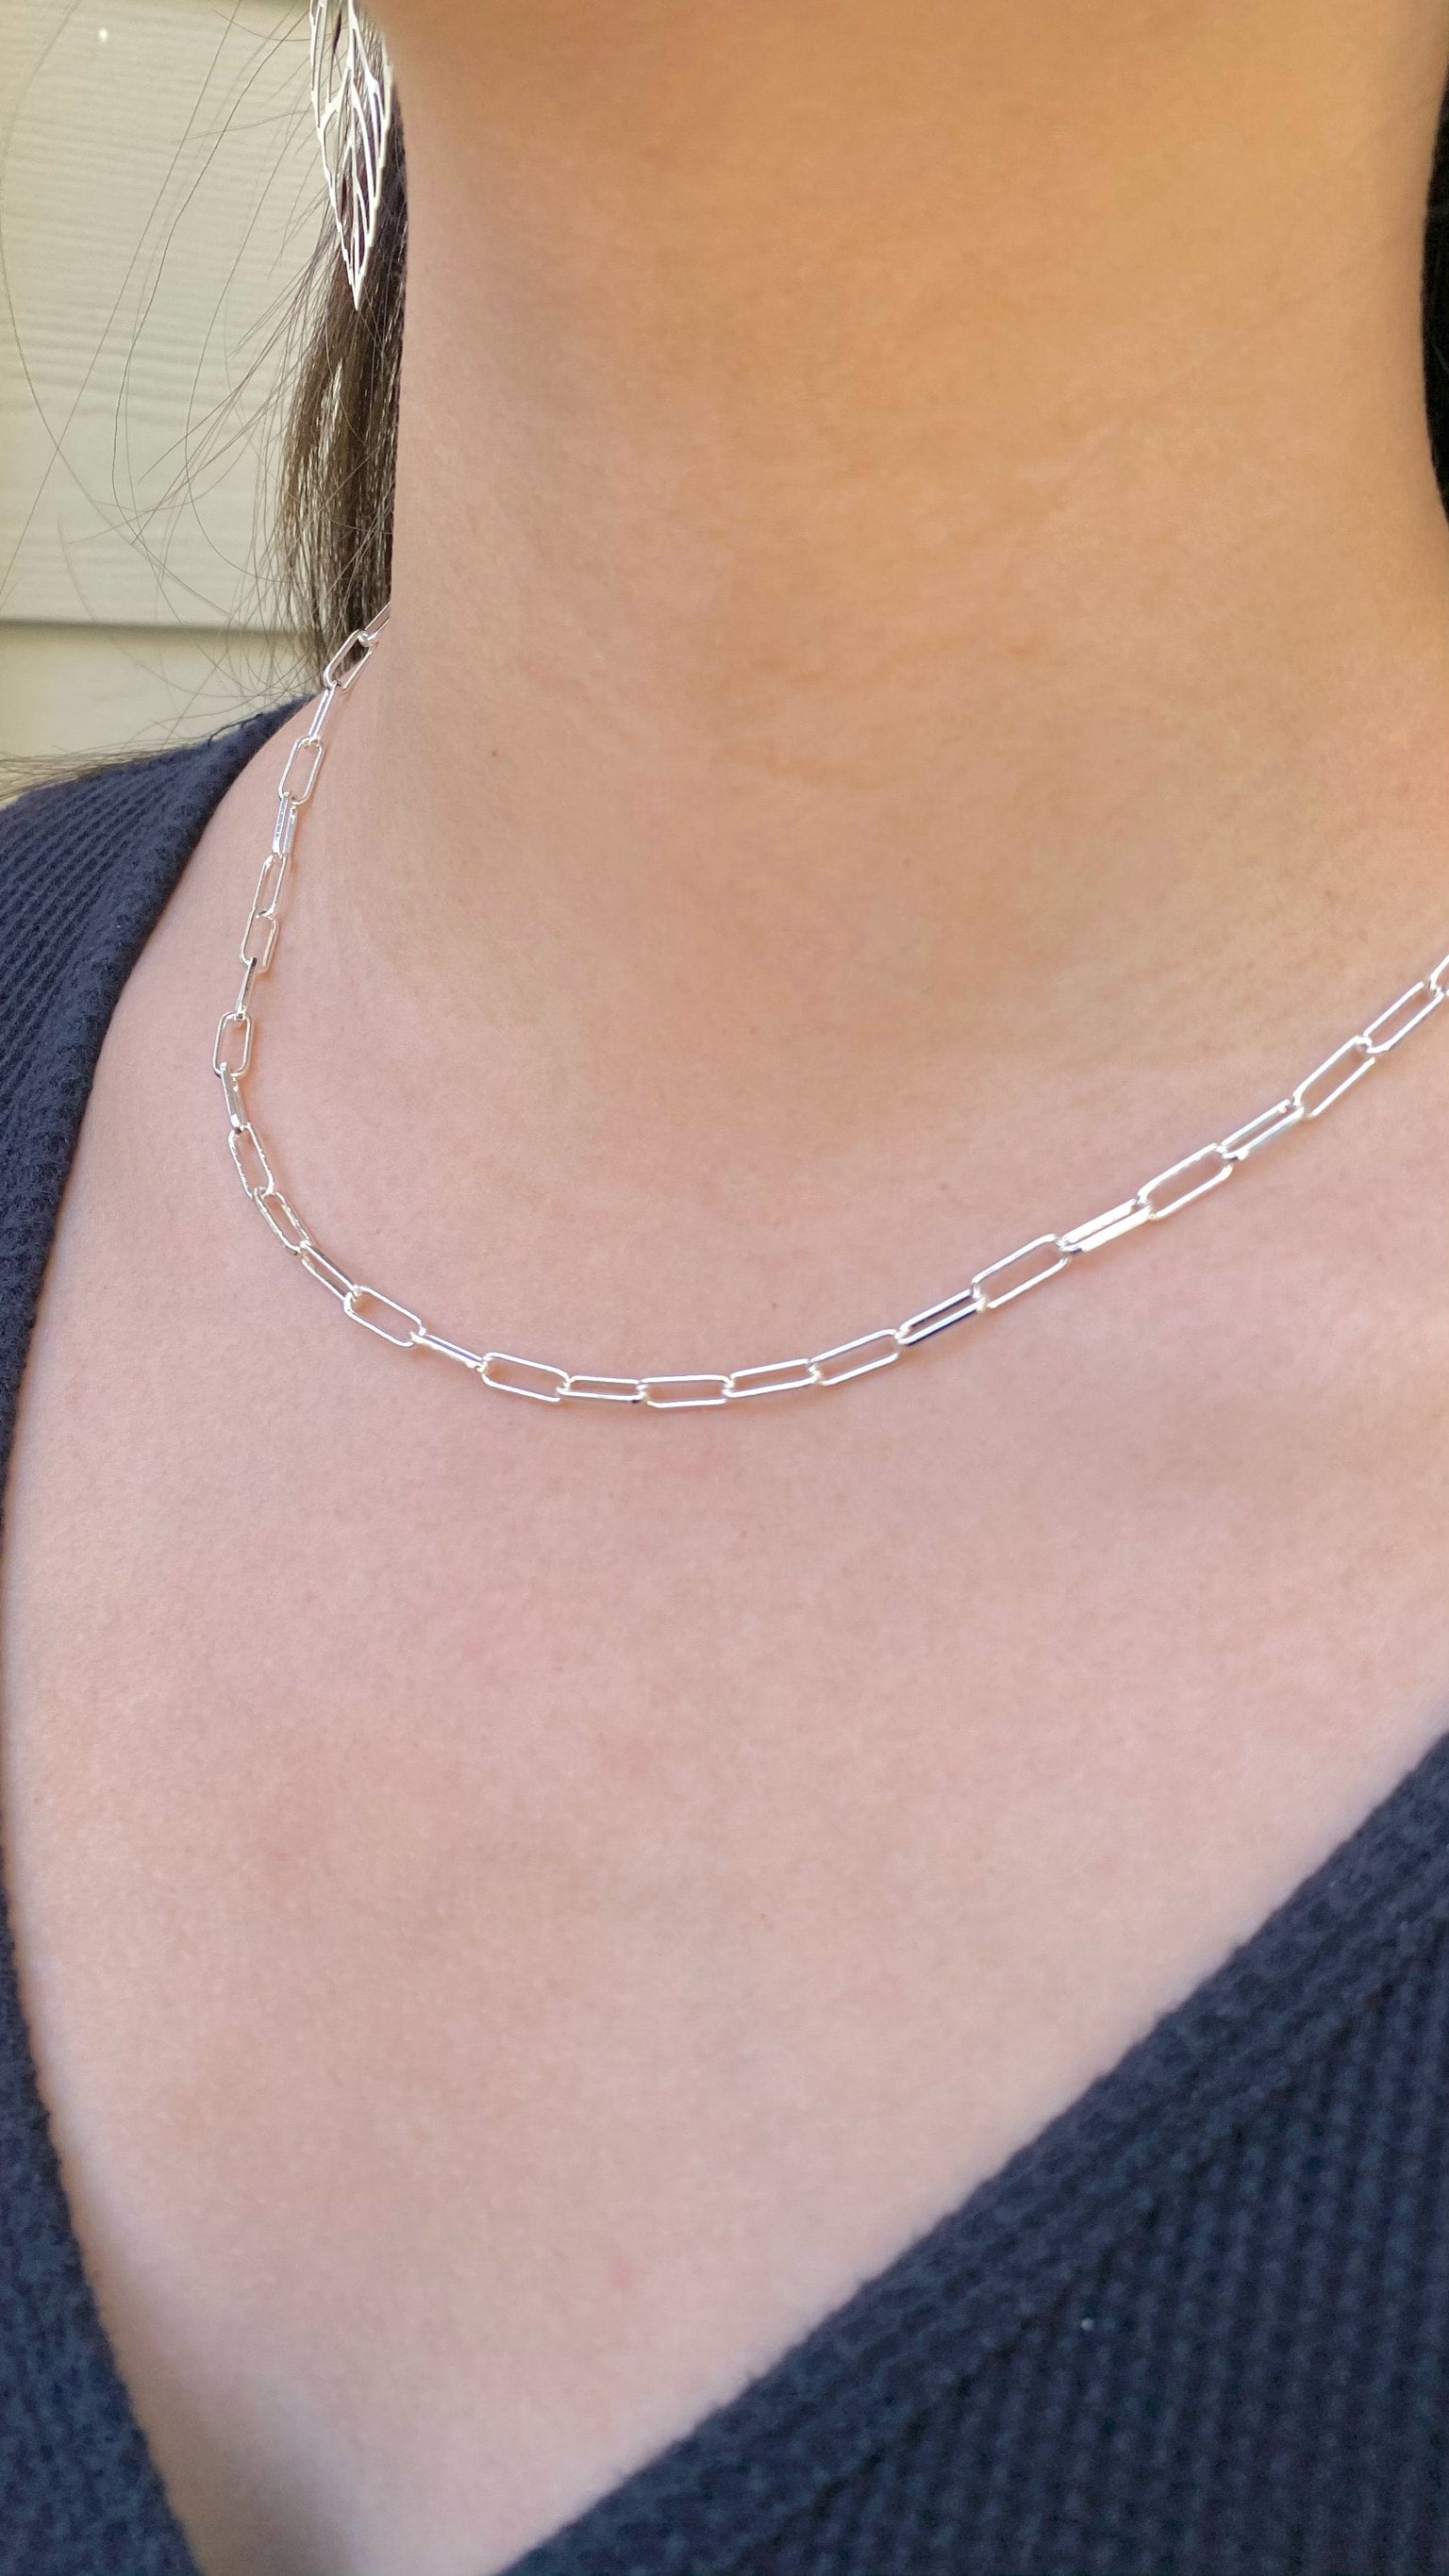 Paperclip Chunky Chain Link Necklace Silver for Women, Men Choker Chain  Necklace, Large Link Necklaces - Etsy | Large link necklace, Necklace, Chain  link necklace silver